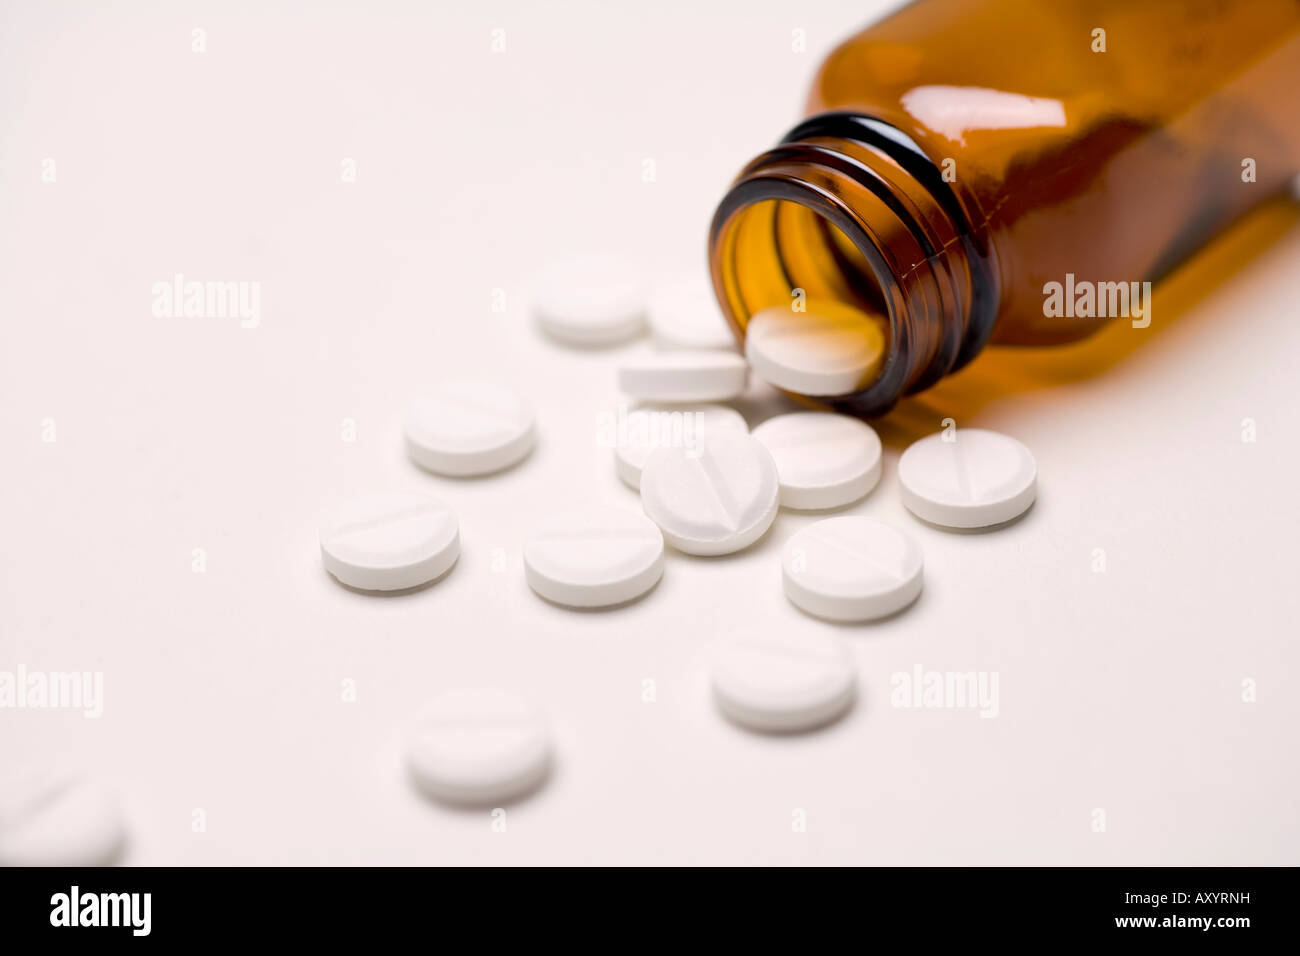 Pills drugs or tablets spilling out of a brown glass medicine bottle aspirin or paracetamol painkillers Stock Photo